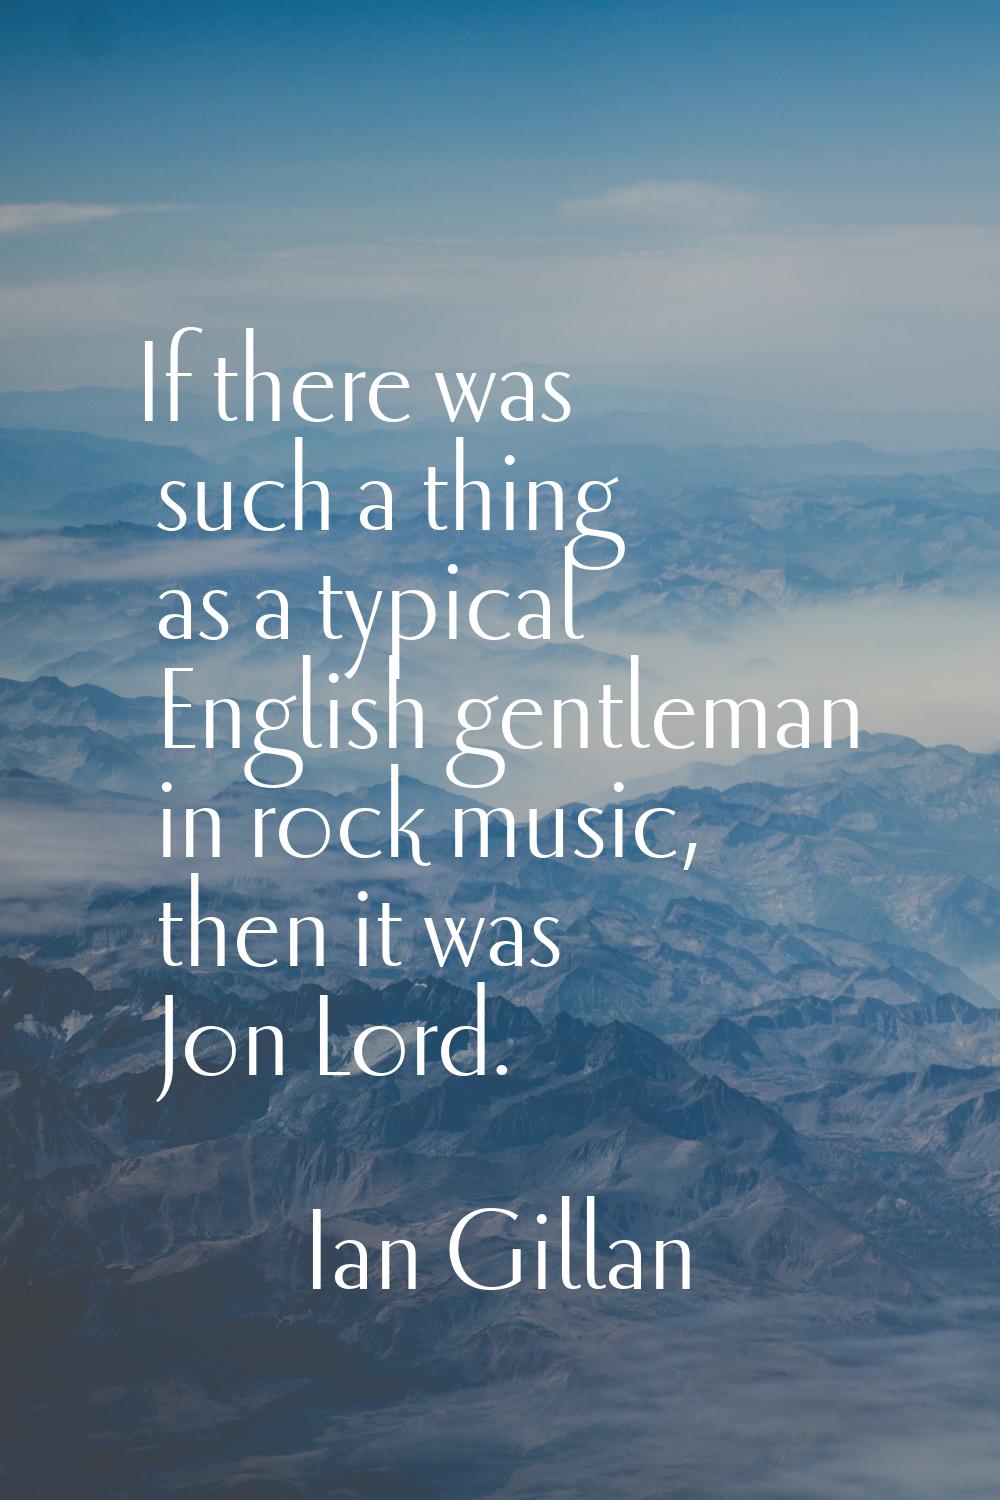 If there was such a thing as a typical English gentleman in rock music, then it was Jon Lord.